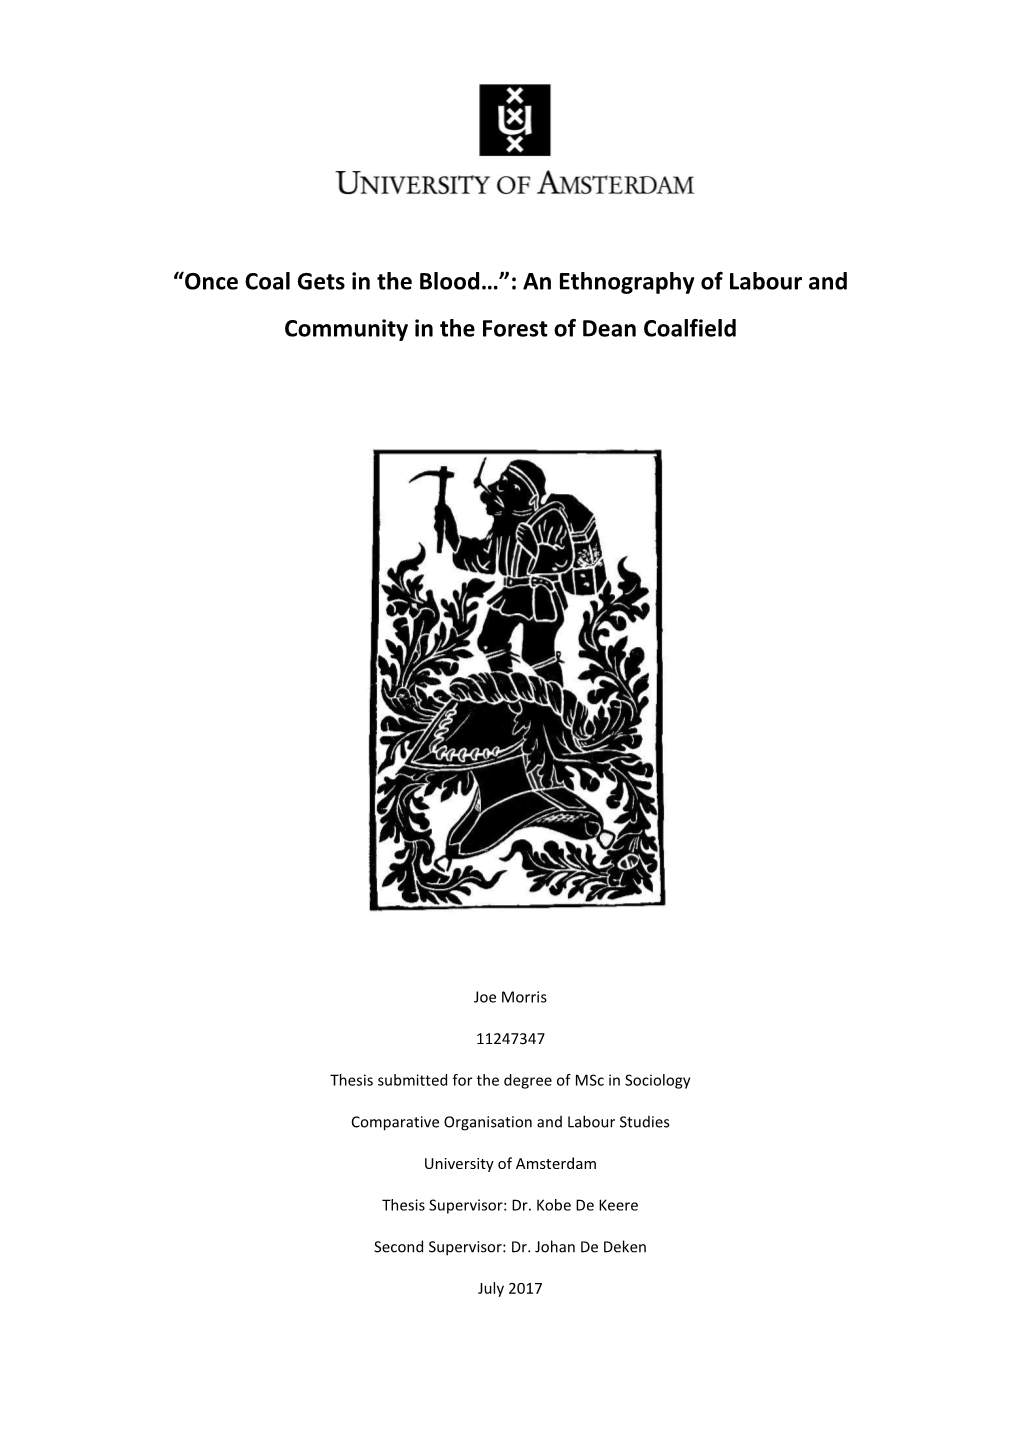 “Once Coal Gets in the Blood…”: an Ethnography of Labour and Community in the Forest of Dean Coalfield